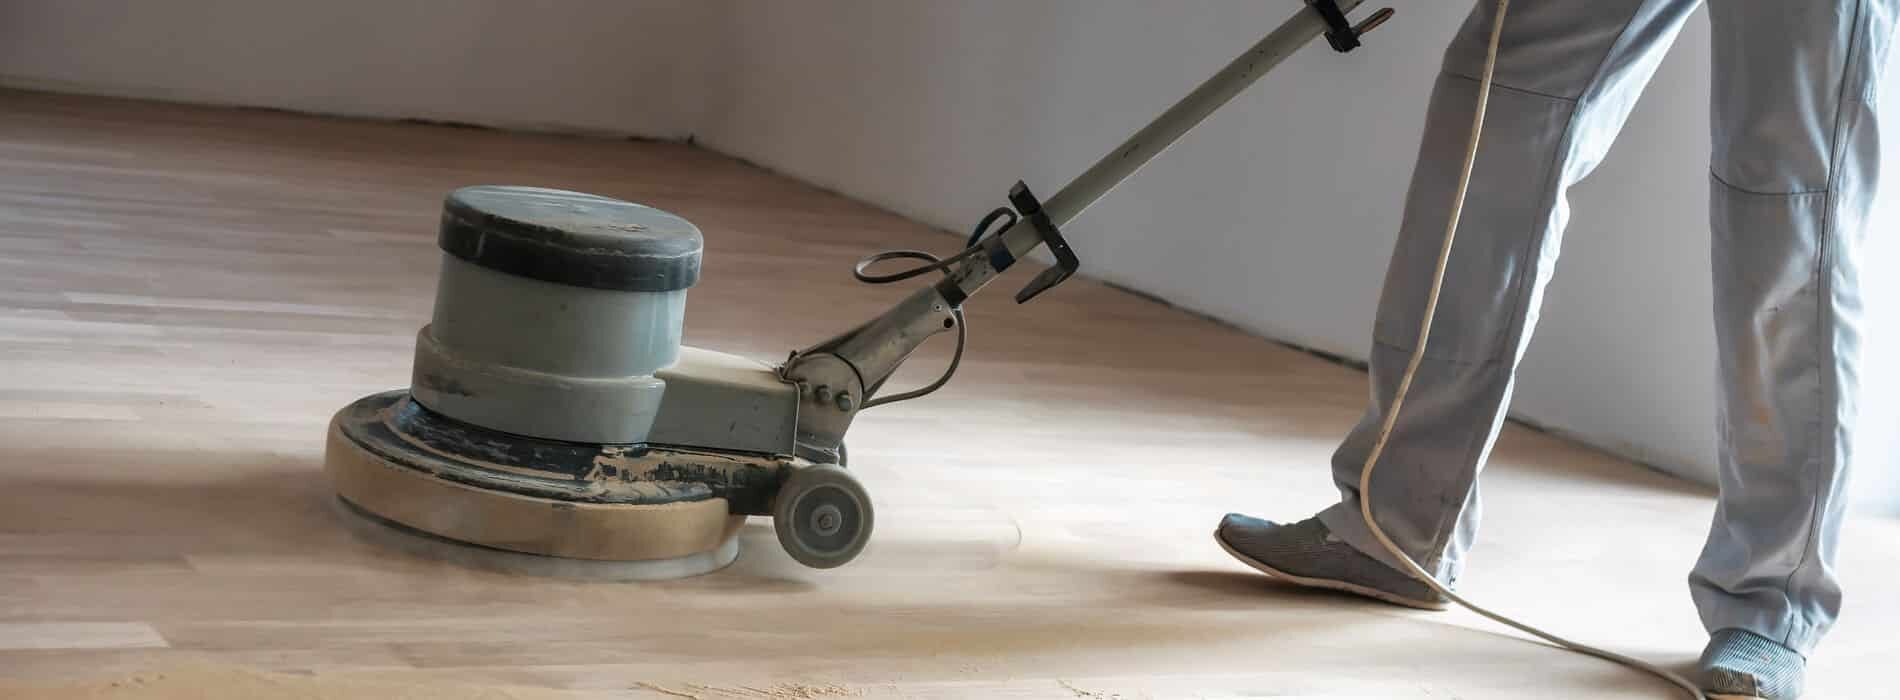 A team of professionals bring out the luster in a parquet floor, utilizing a powerful 240v polishing machine with a 407mm driving plate and a 60grit screen to achieve a flawless finish.